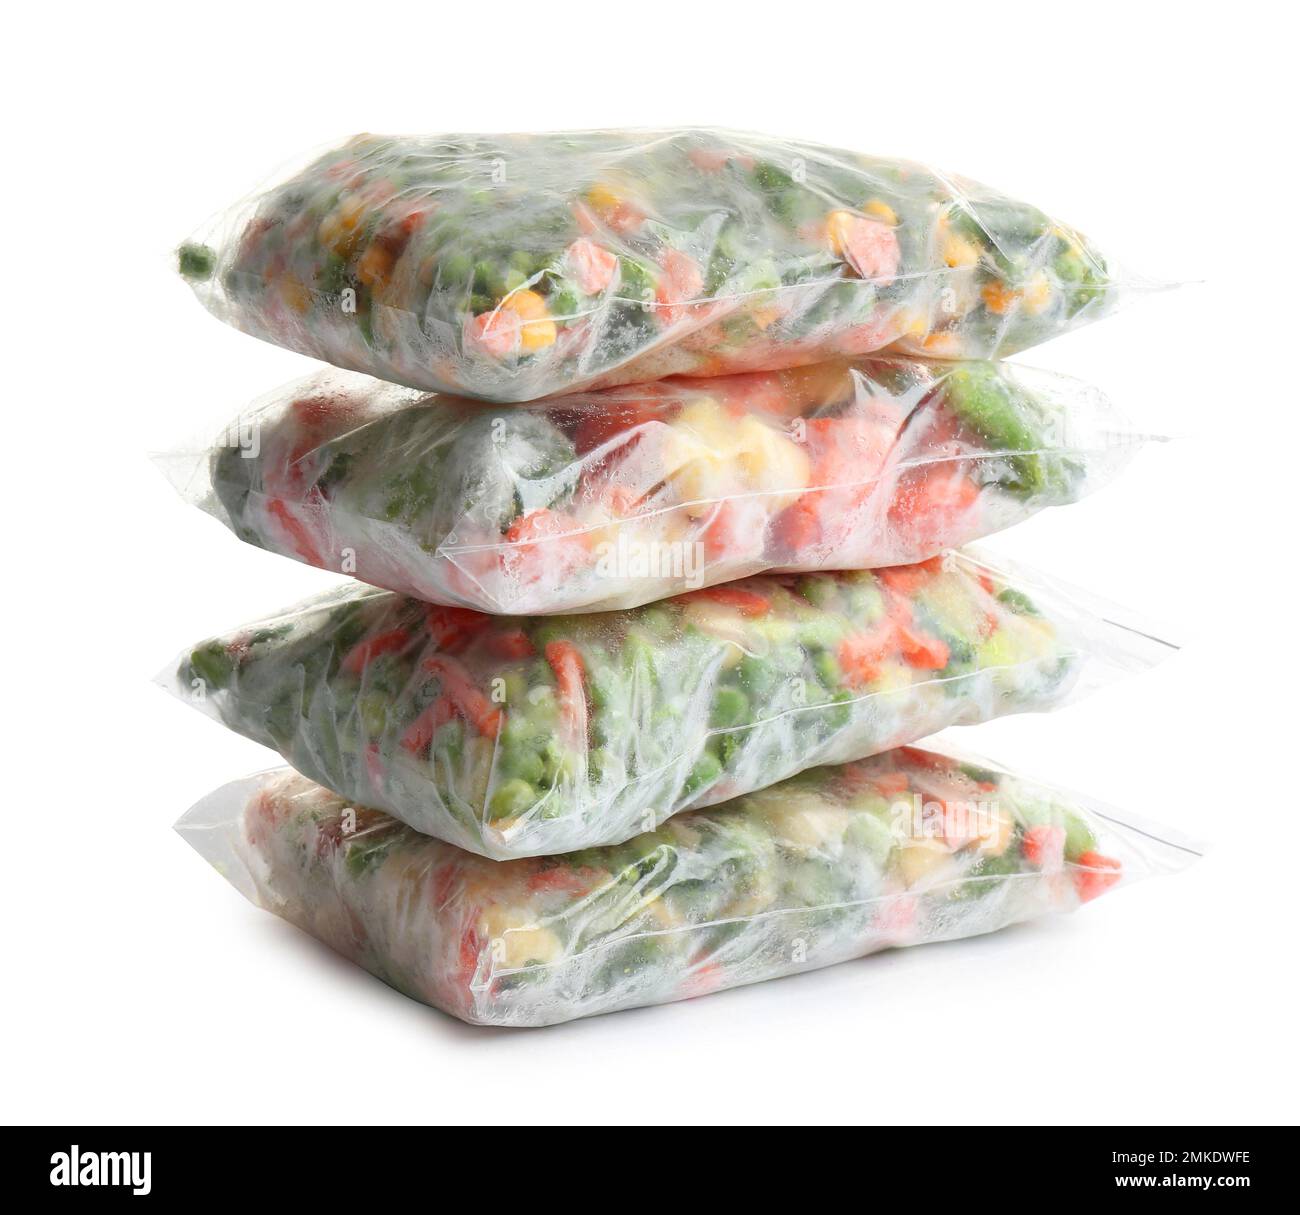 Frozen vegetables in plastic bags isolated on white Stock Photo